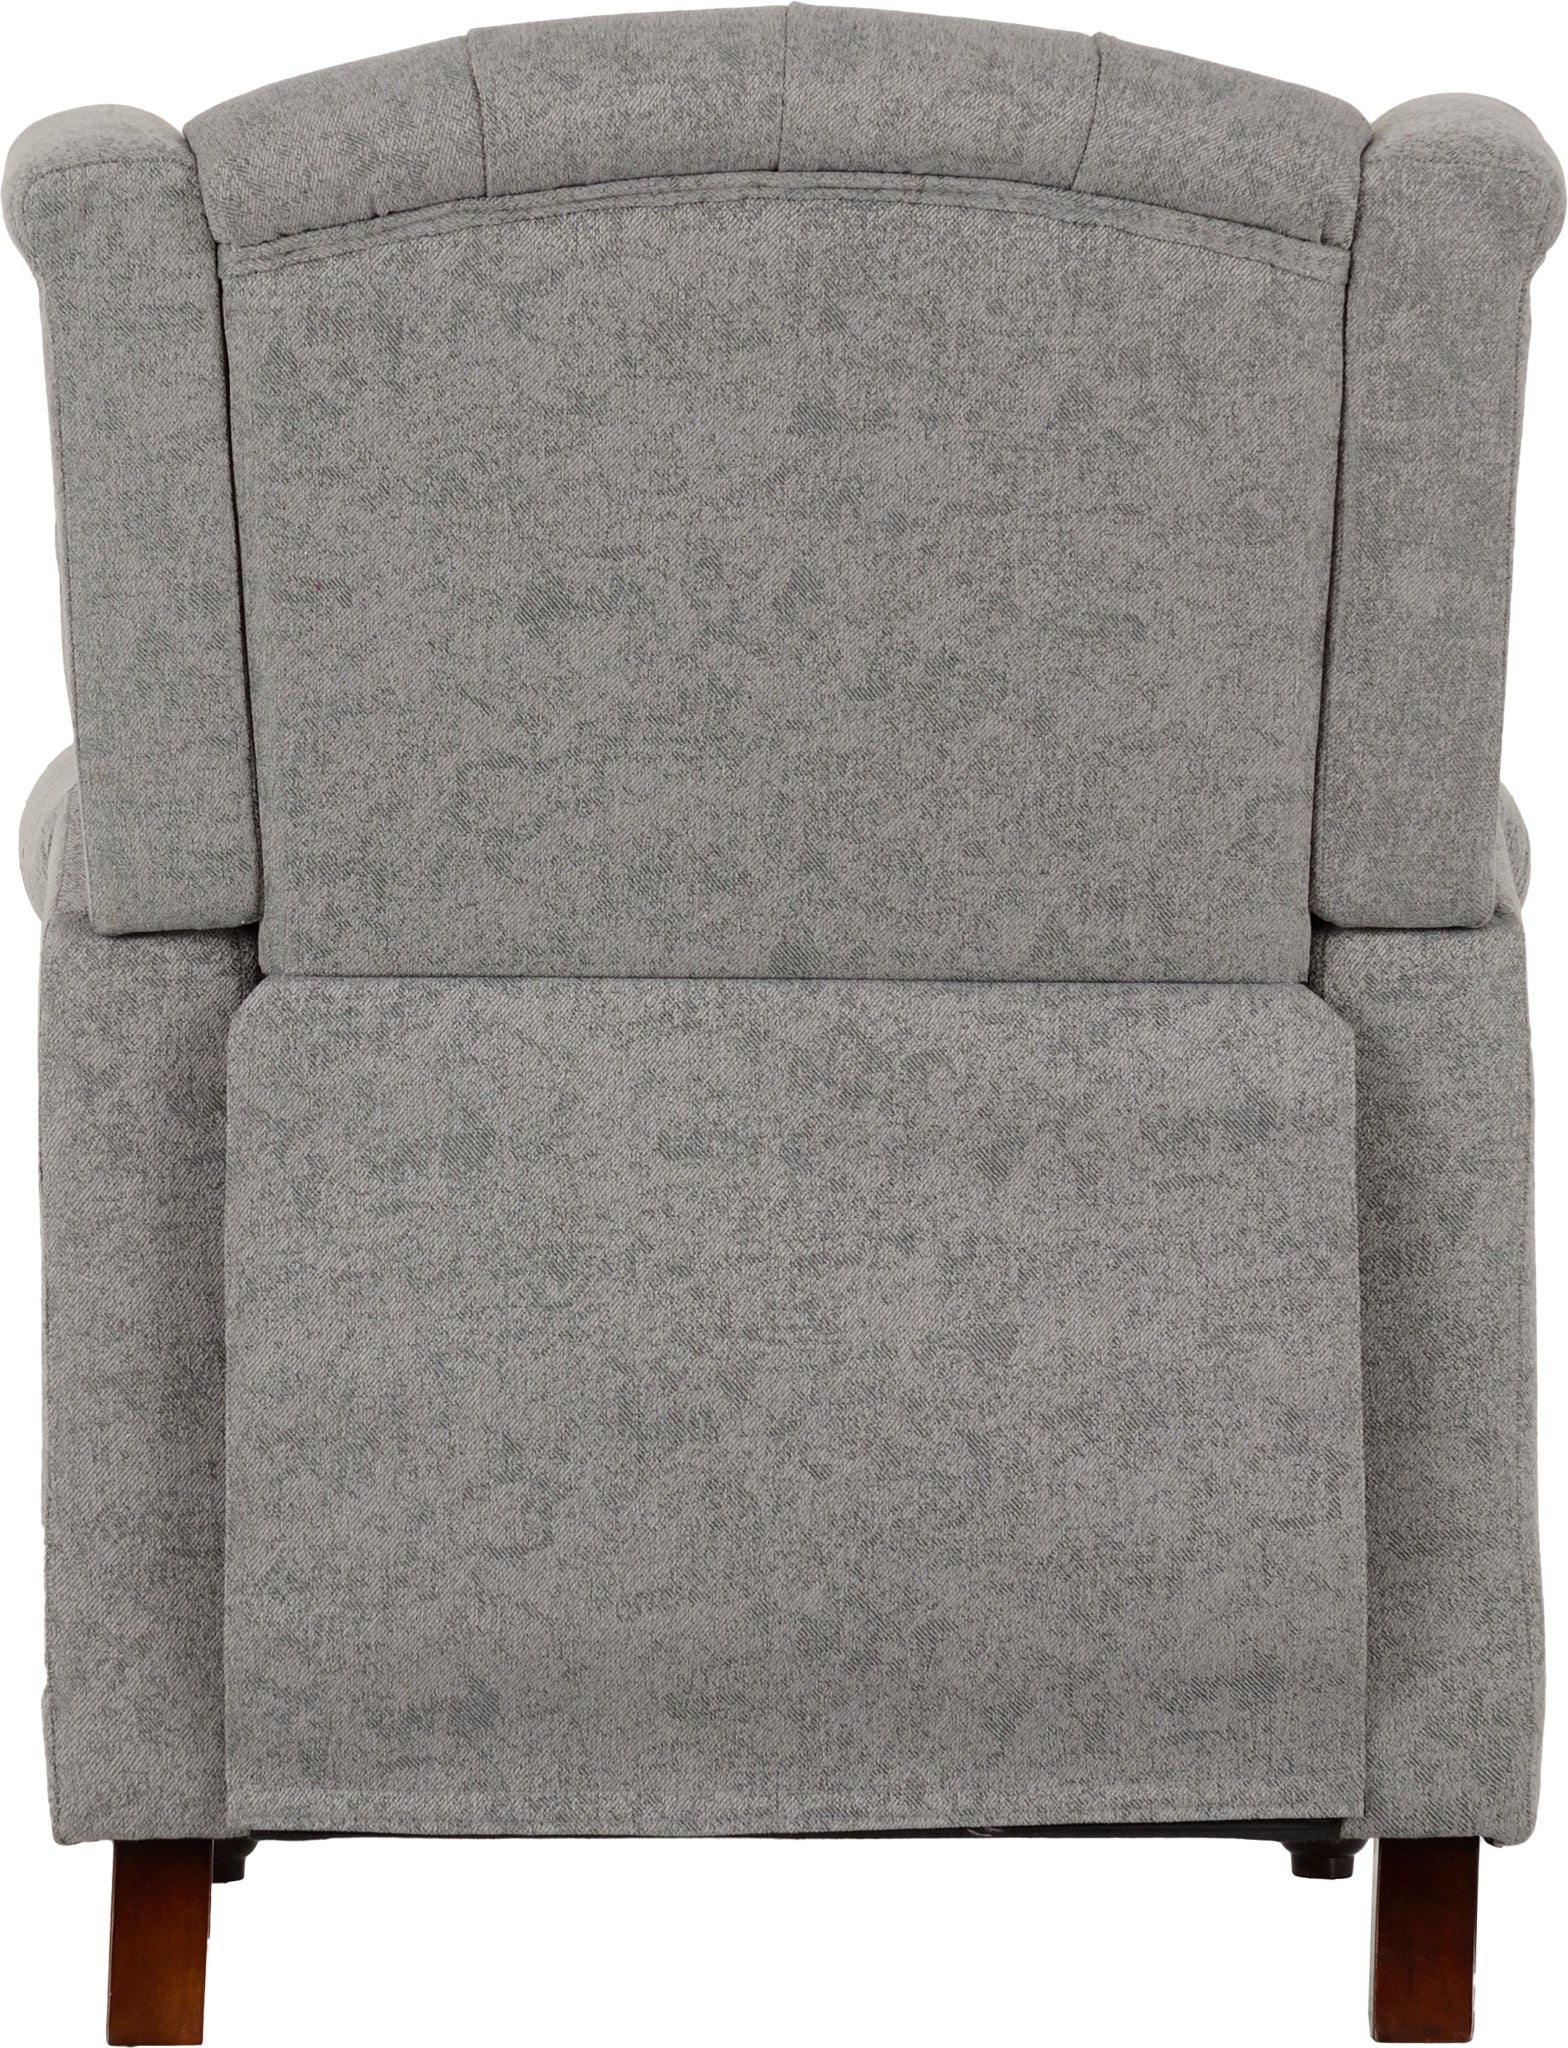 Balmoral Reclining Chair - Grey Fabric- The Right Buy Store